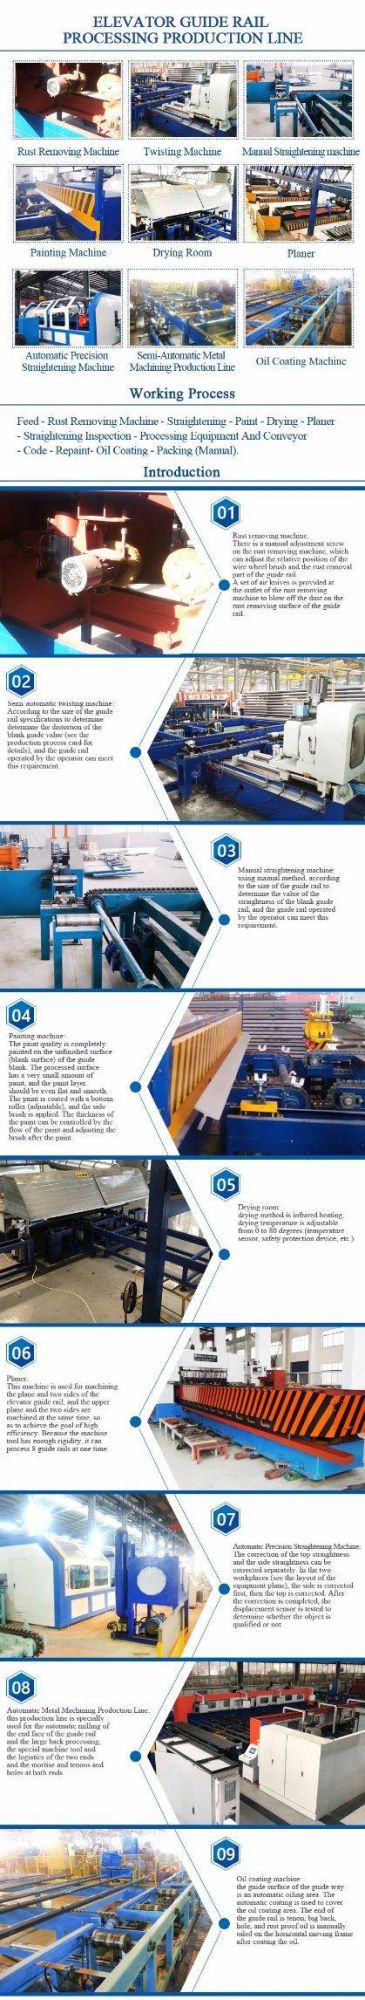 2020 Hot Sale Customized Auto Metal Factory Selling Cold Rolling Elevator Guide Rail Making Forming Machine